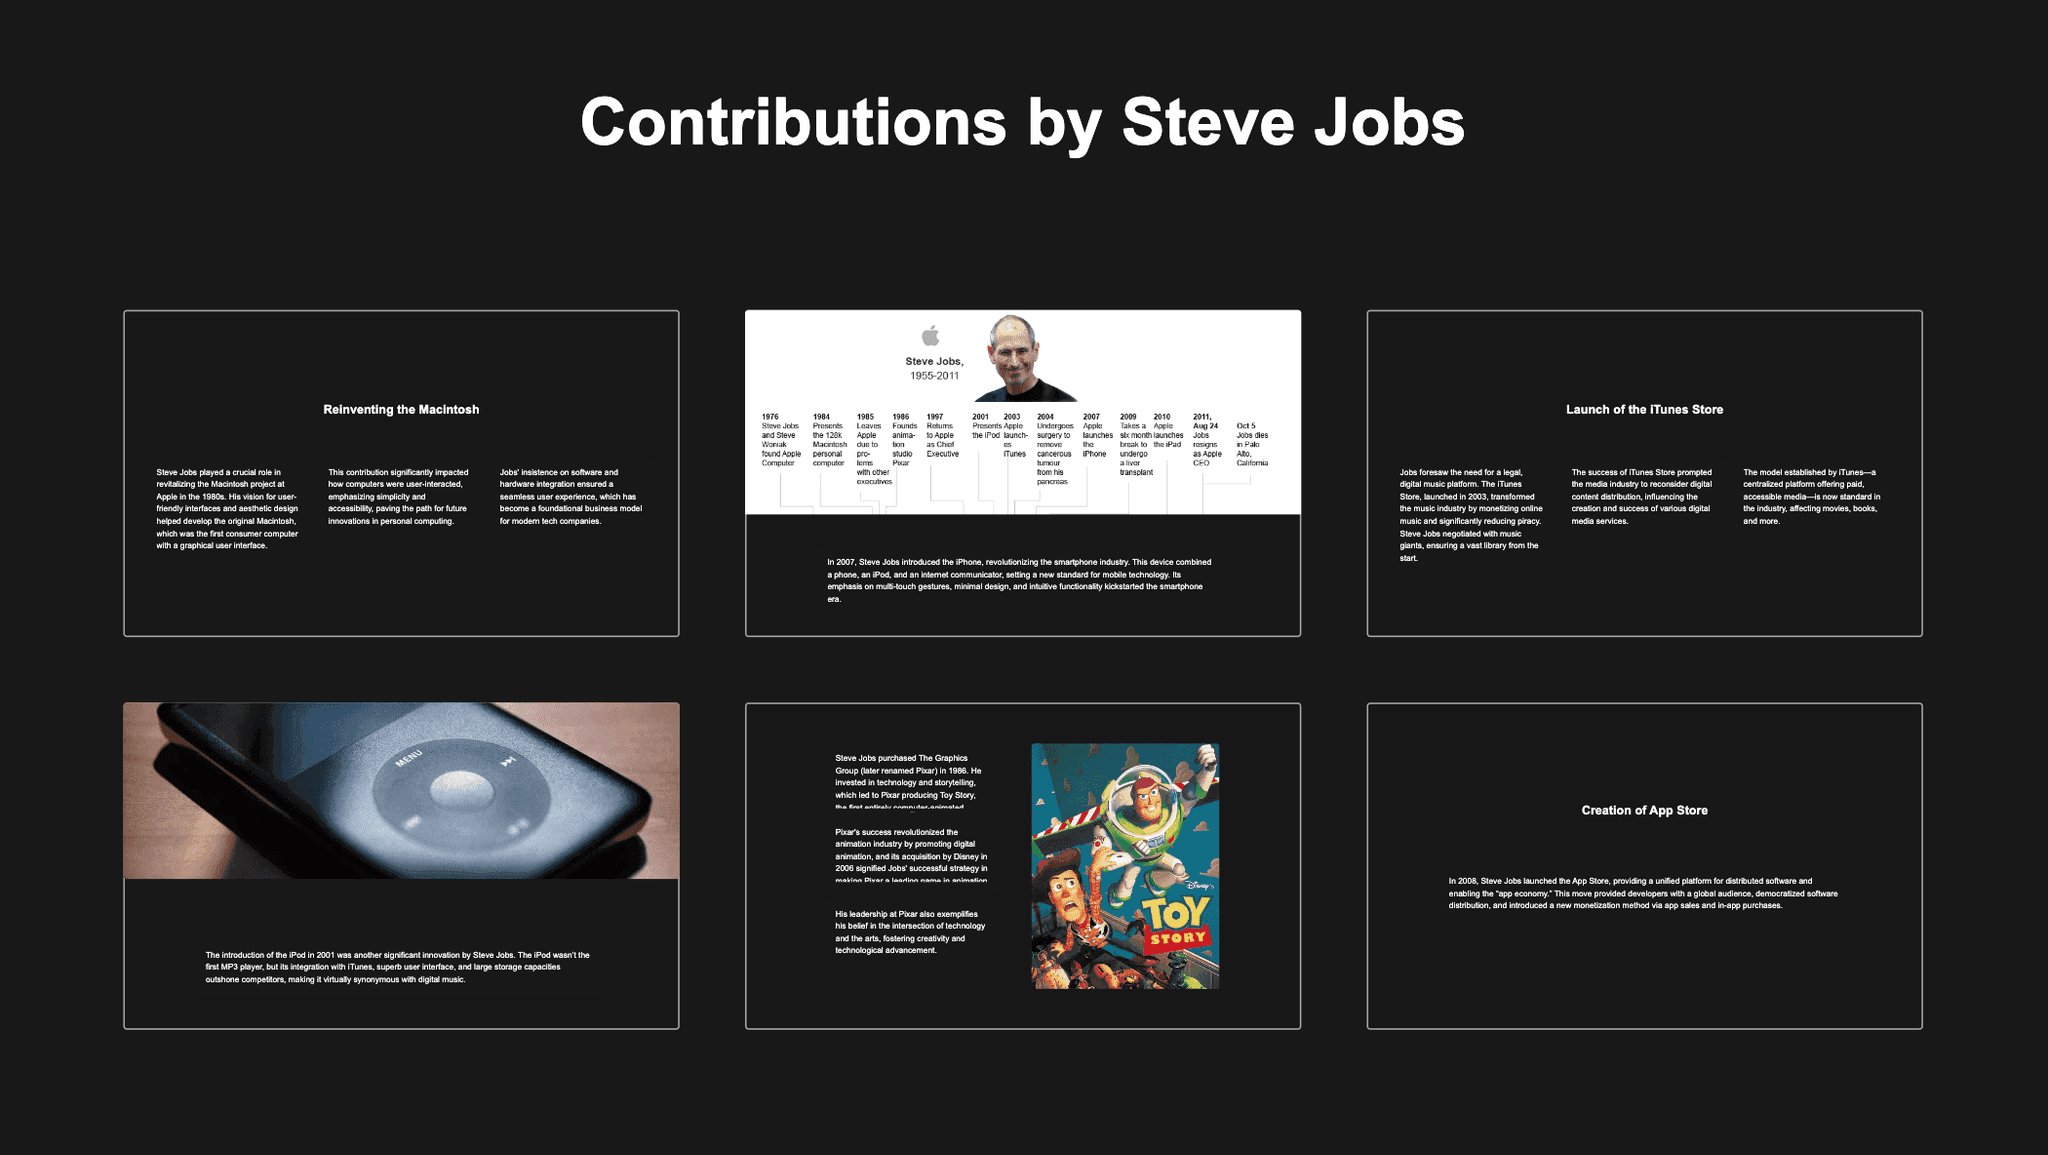 contributions by Steve Jobs to the world: invention of iPod, iPhone, iPad, changing the history of personal computer and start mobile internet